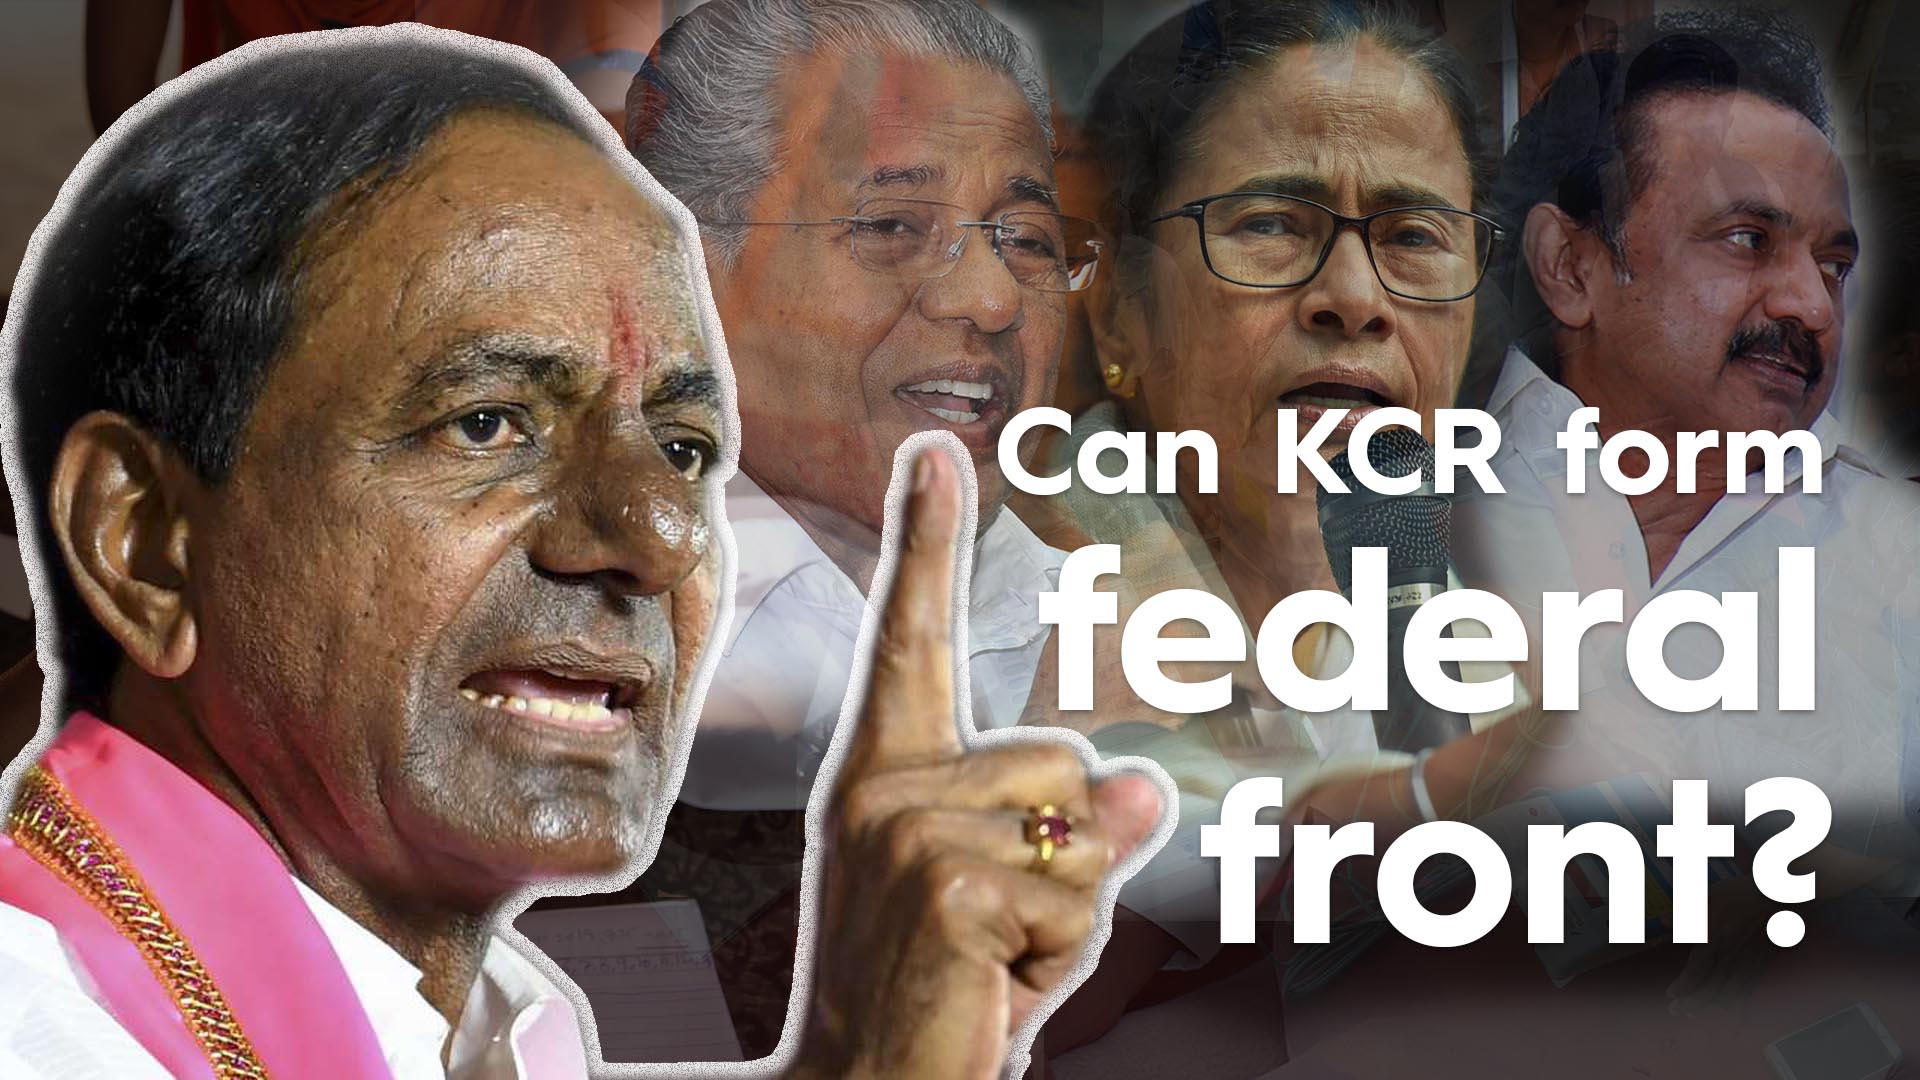 KCR yet again attempts to form a federal front